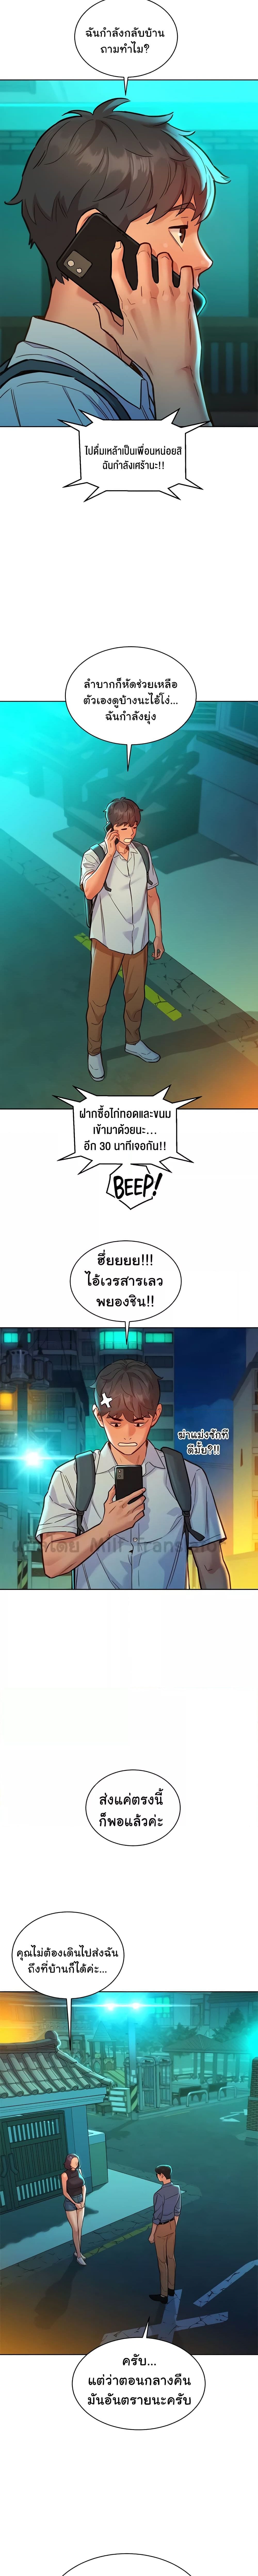 Let’s Hang Out from Today ตอนที่ 46 ภาพ 9